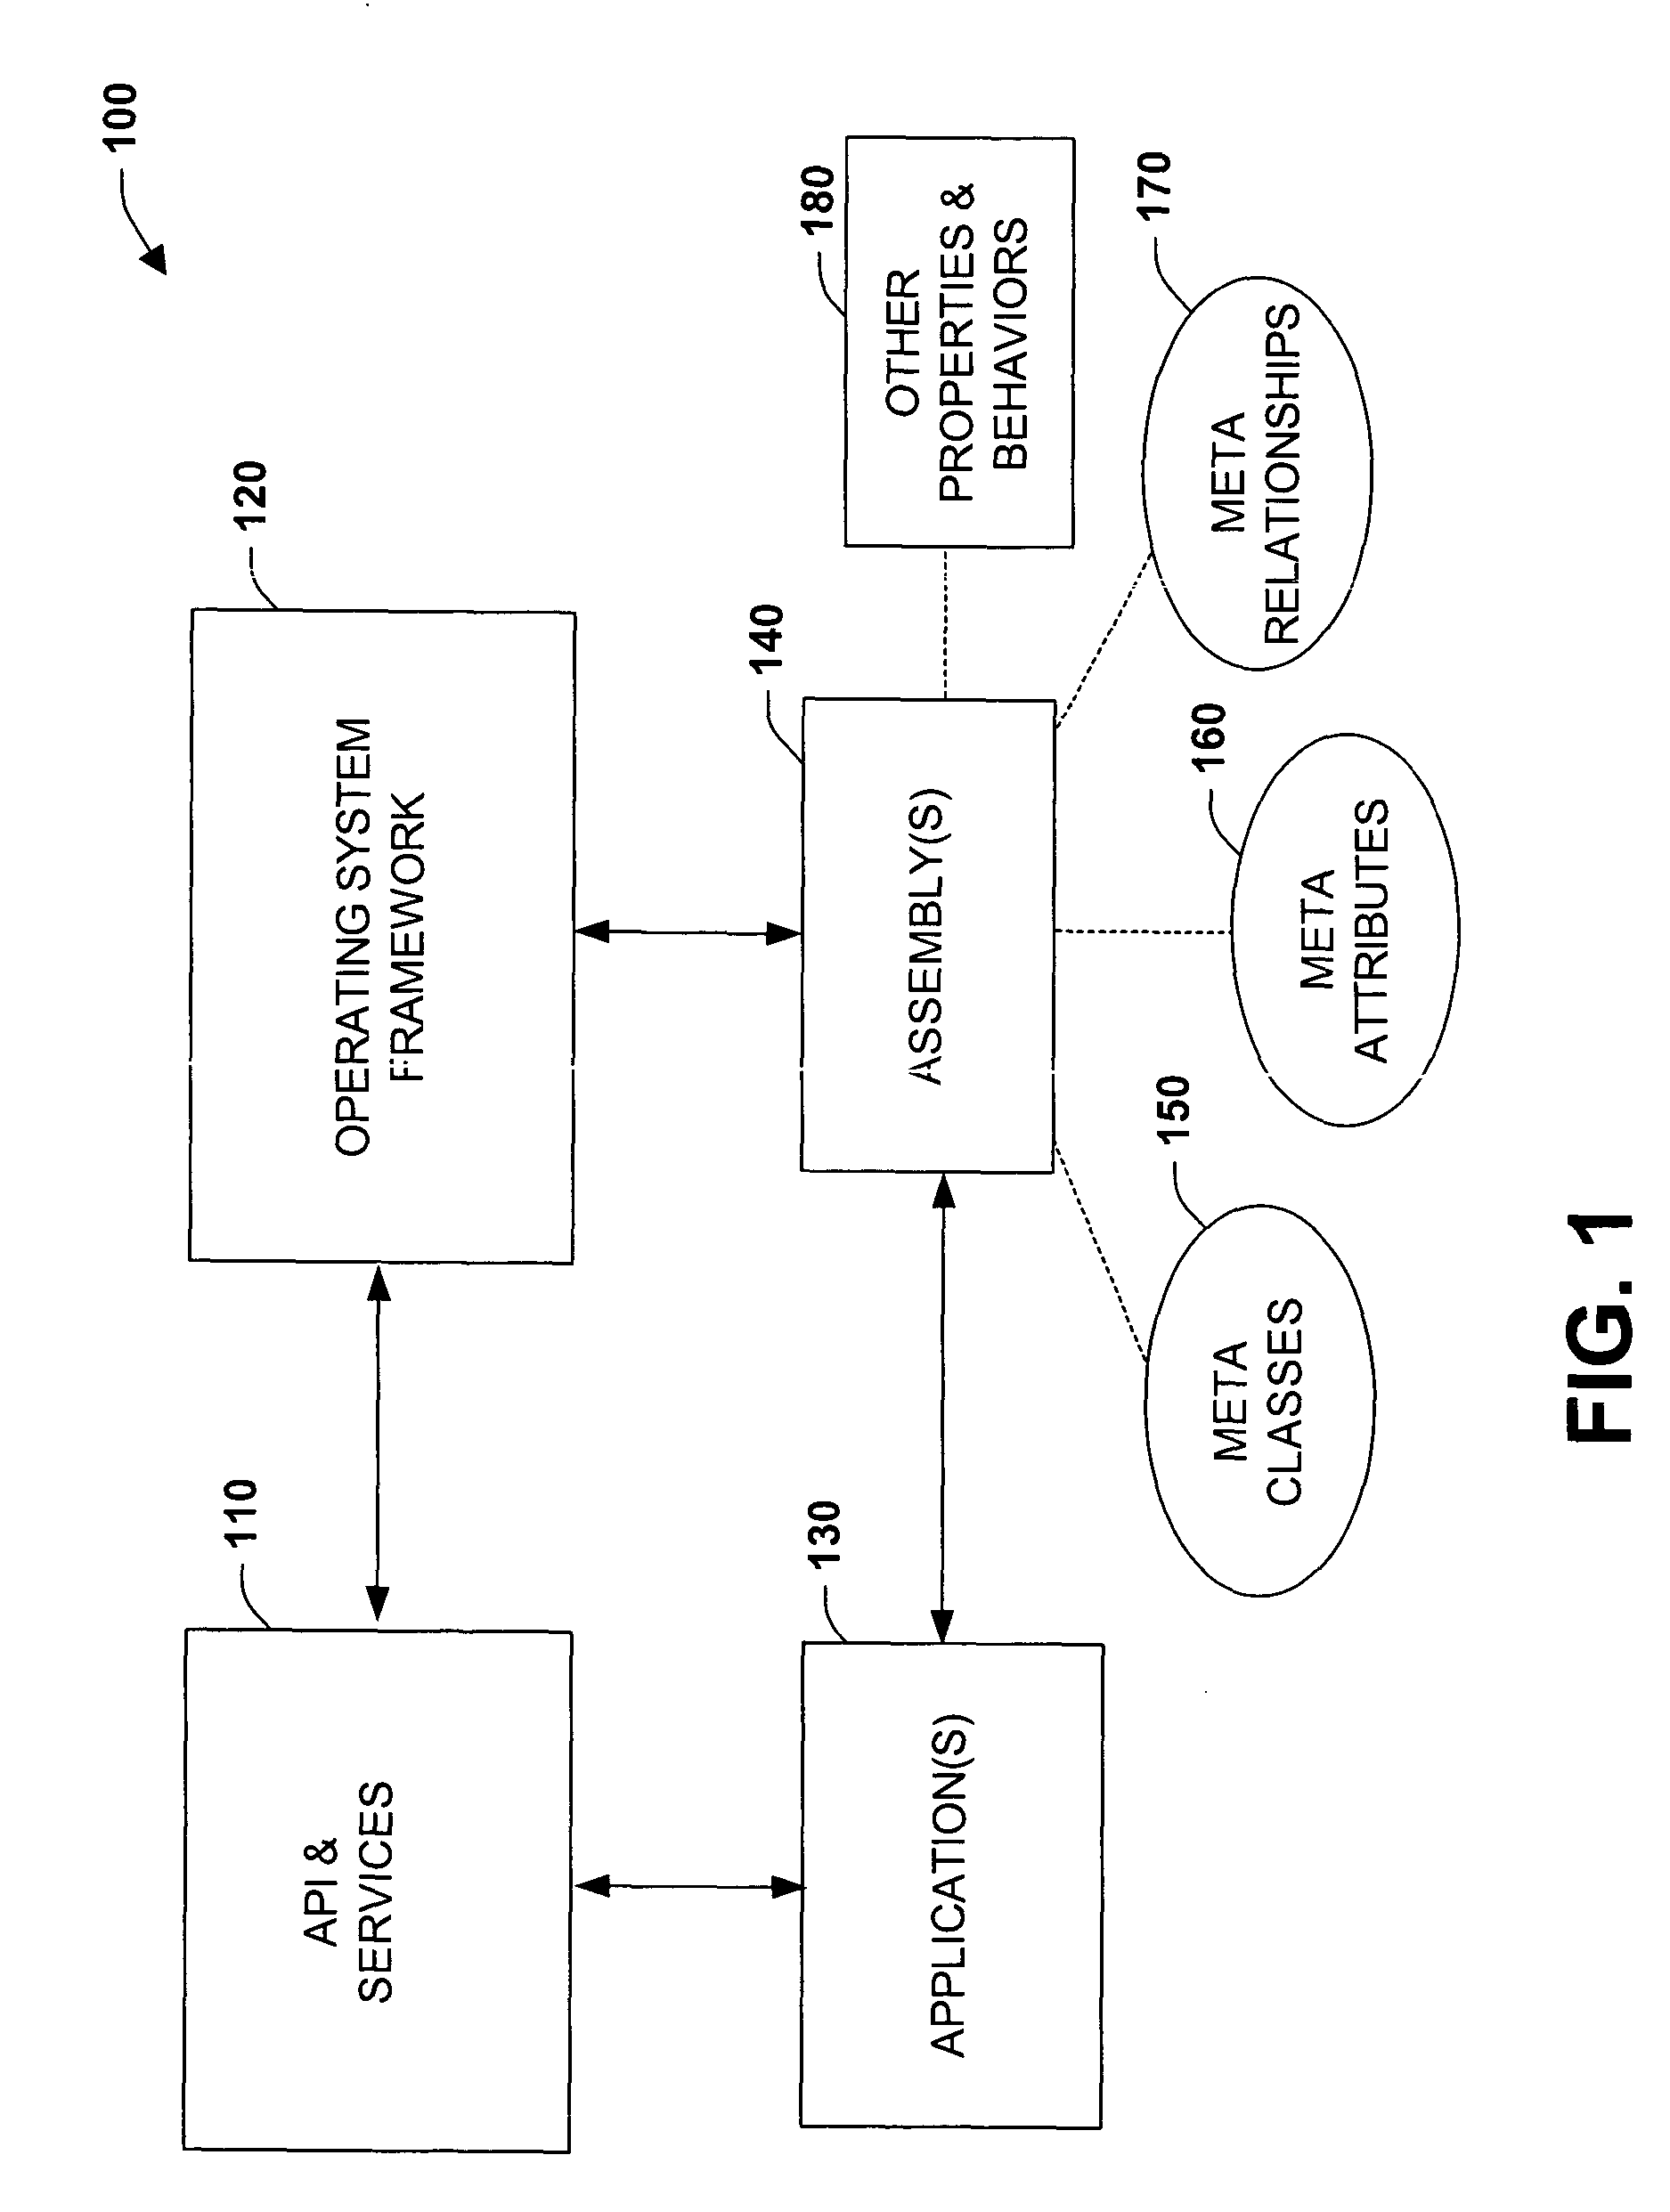 Exstensibility application programming interface and framework for meta-model objects